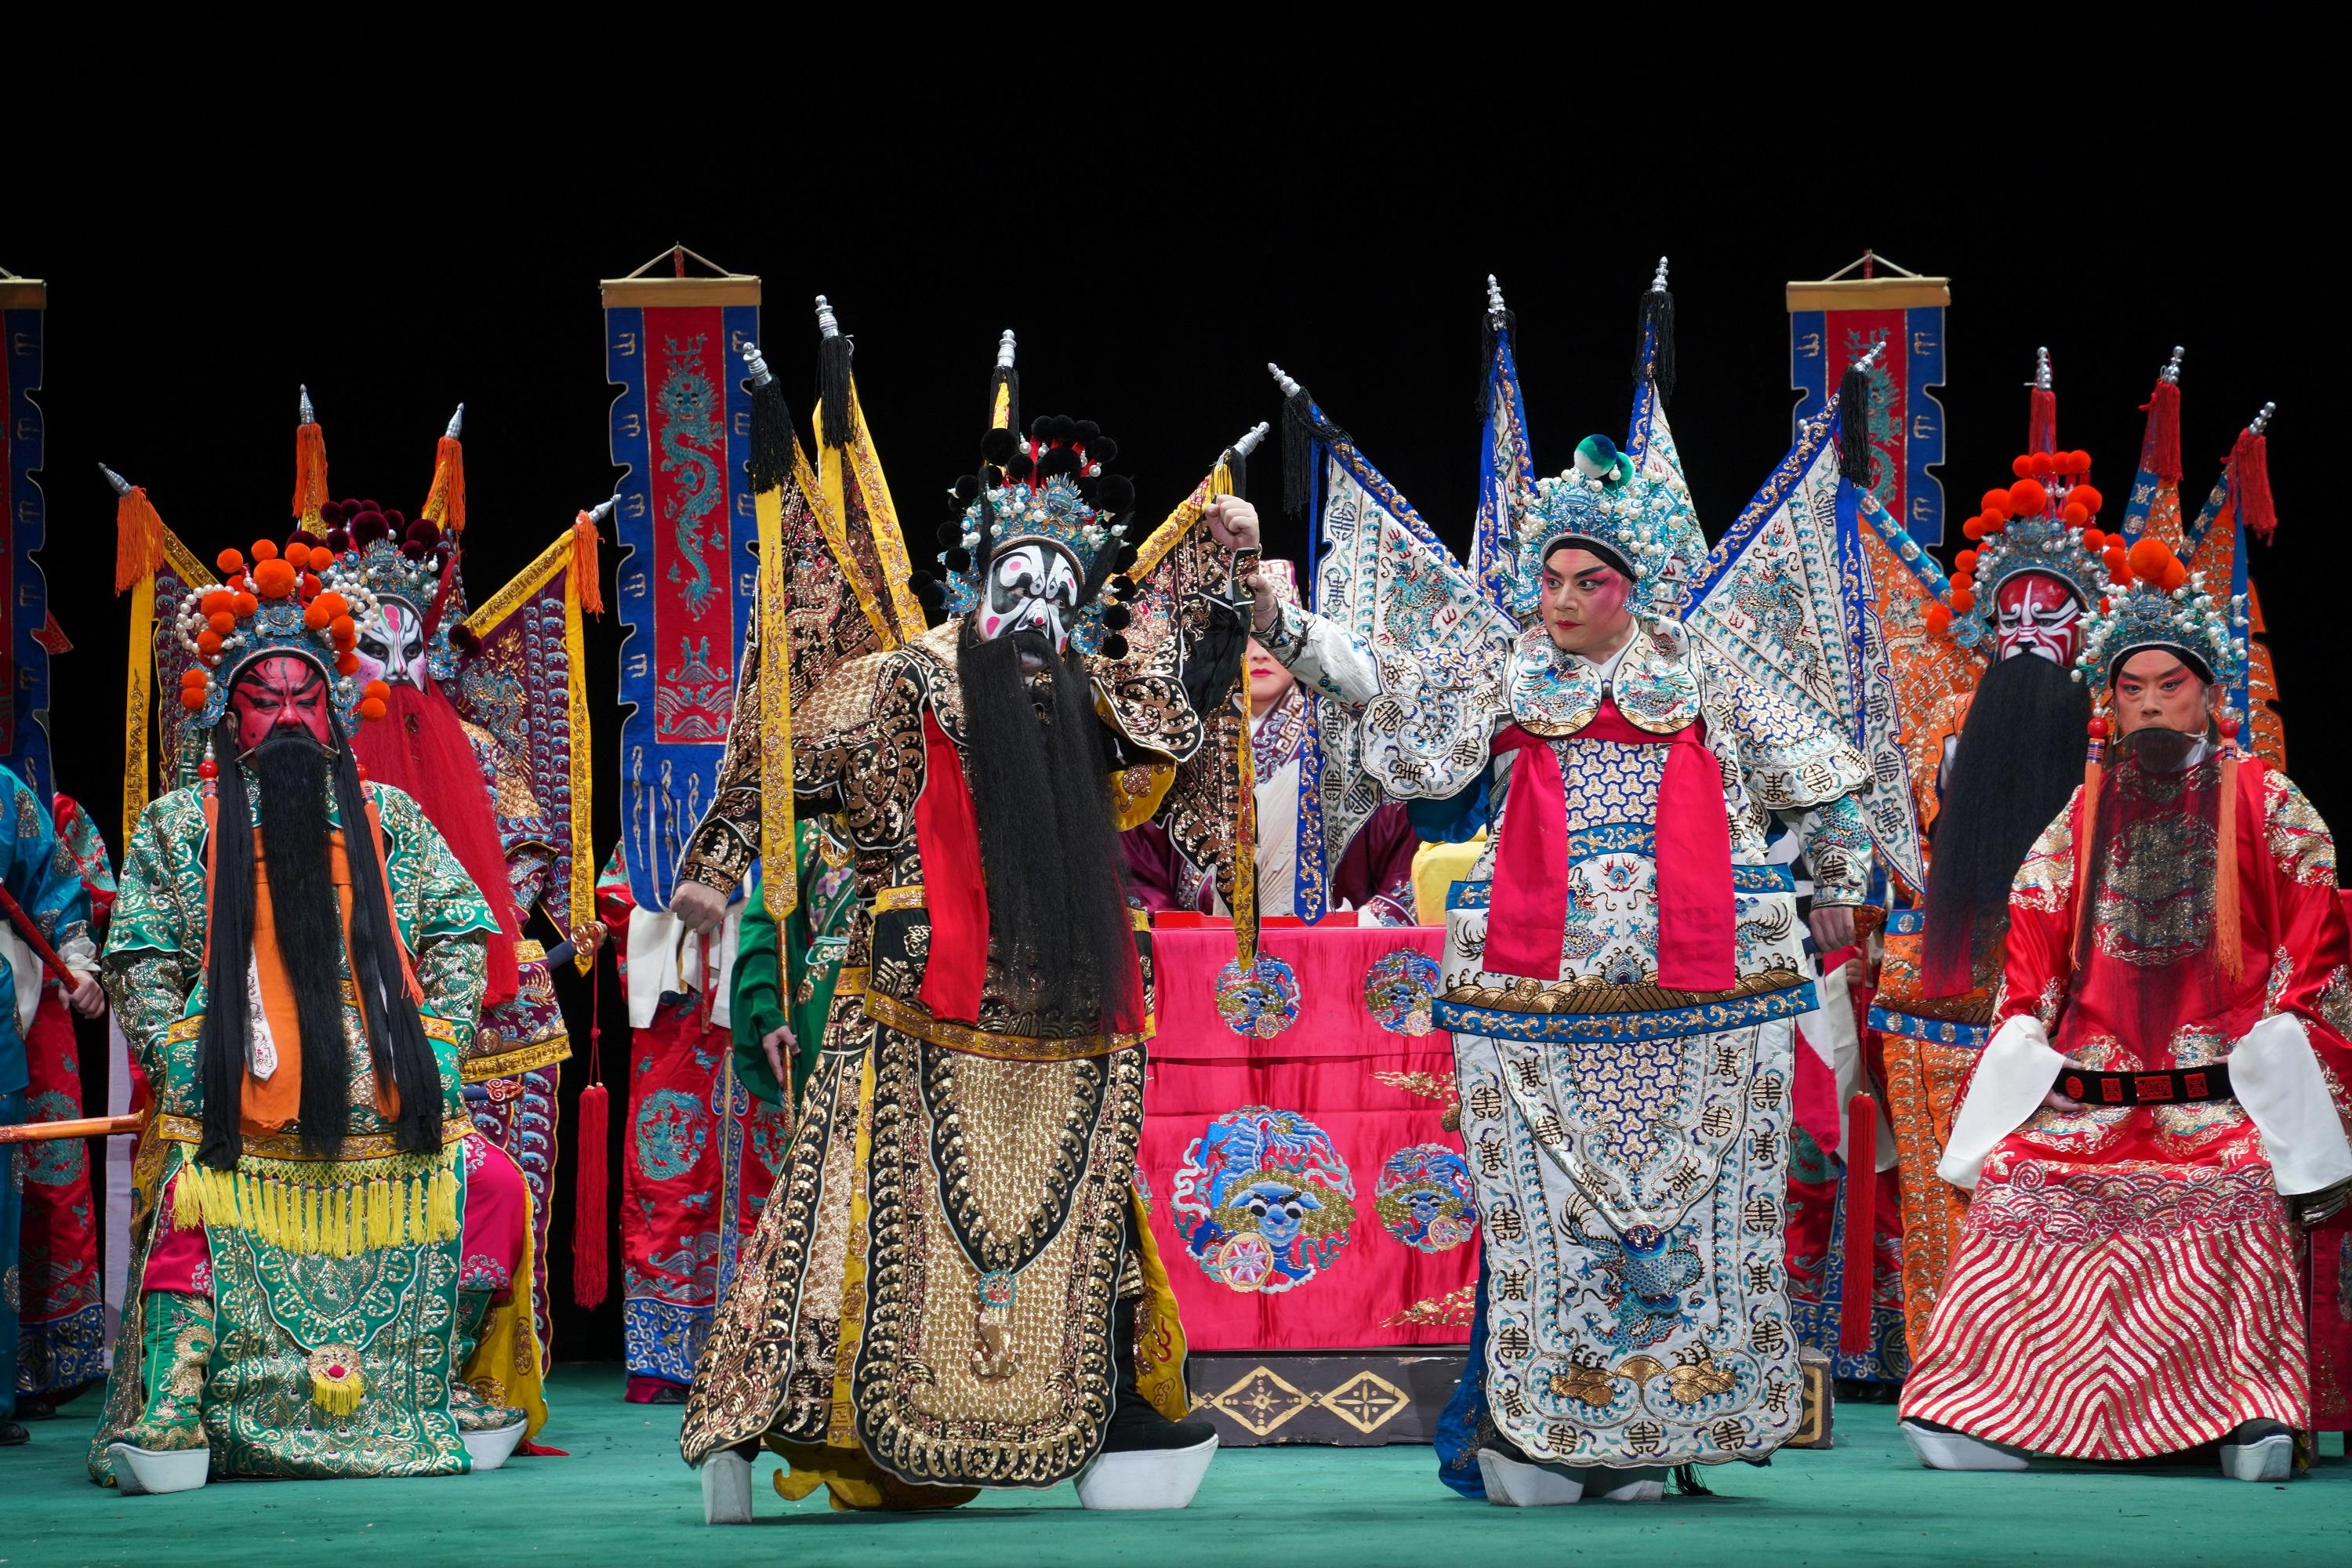 The Leisure and Cultural Services Department will present eight quality programmes at this year's Chinese Opera Festival from June to August. Photo shows a scene from the Liuzi opera performance "Zhang Fei Crashing the Palace Gate".